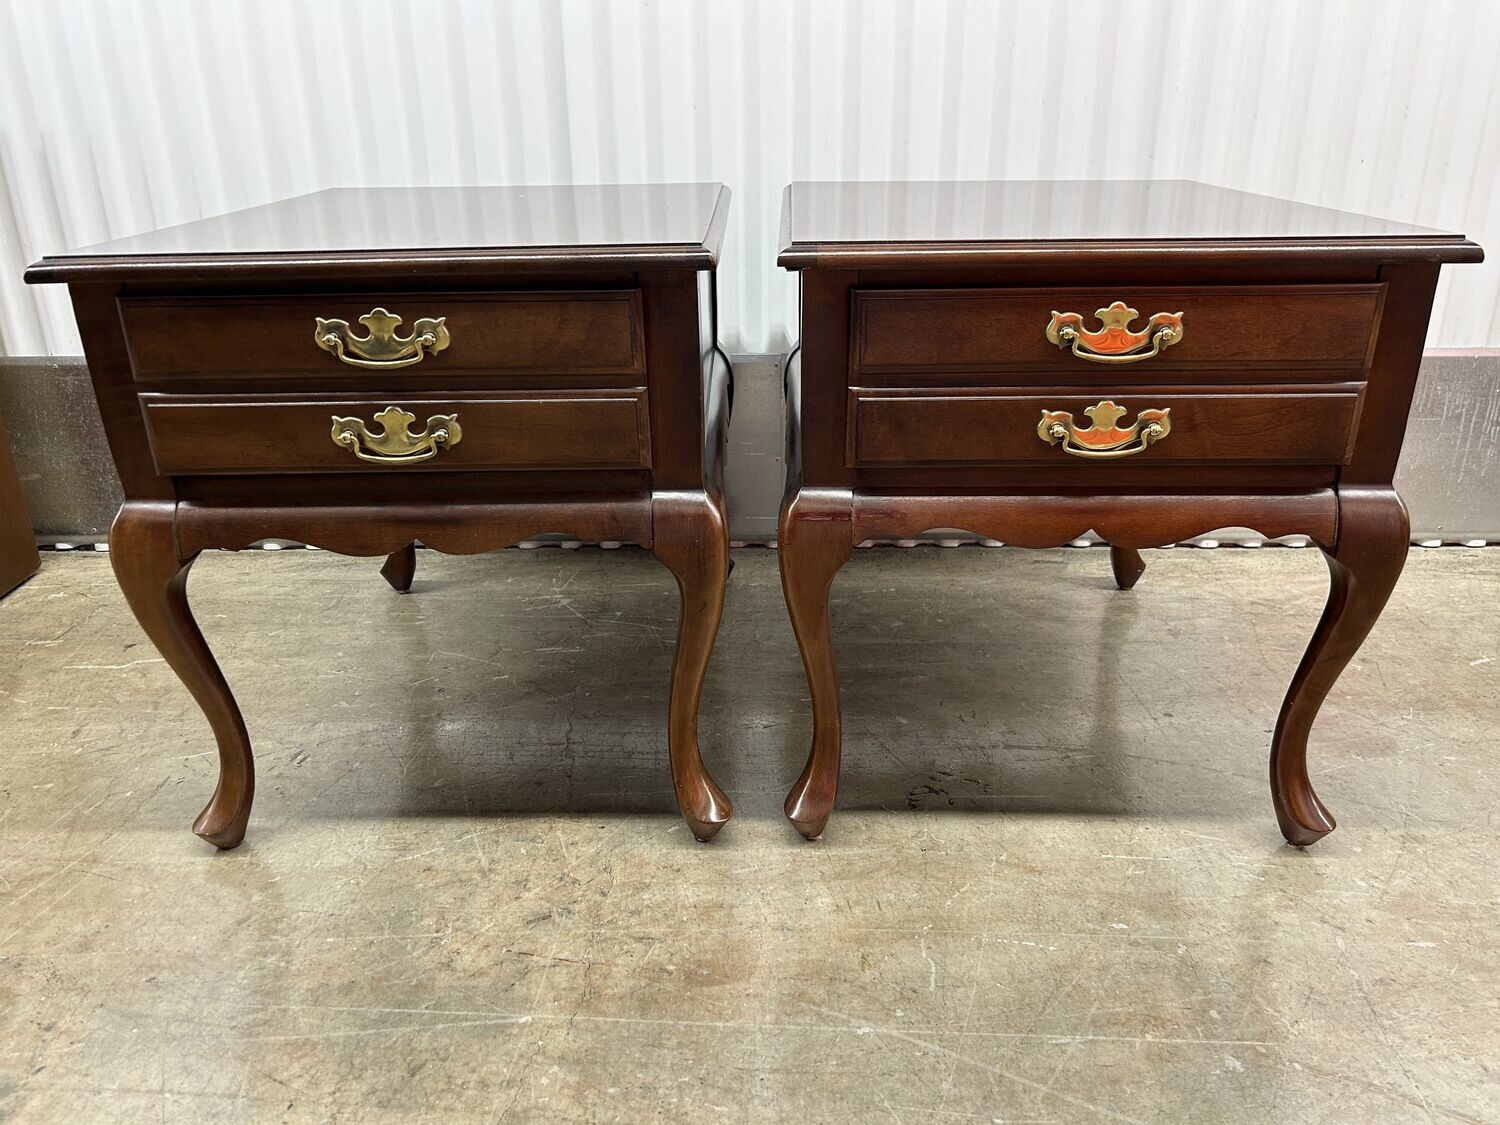 Pair Queen Anne style End Tables, cherry finish #2118 ** 3 wks. to sell, full price